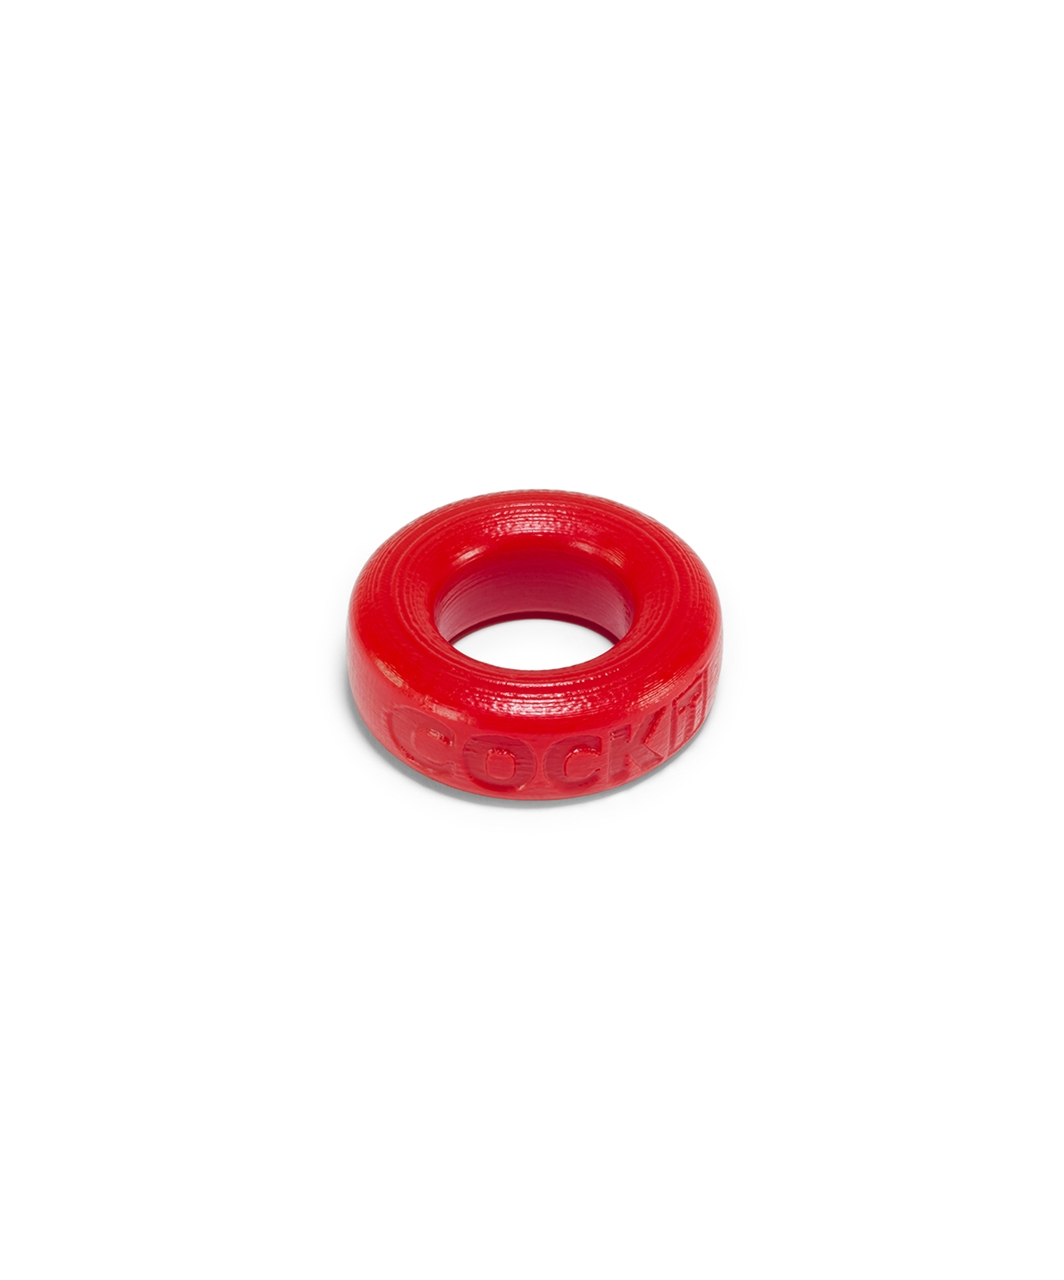 Oxballs COCK-T cock ring